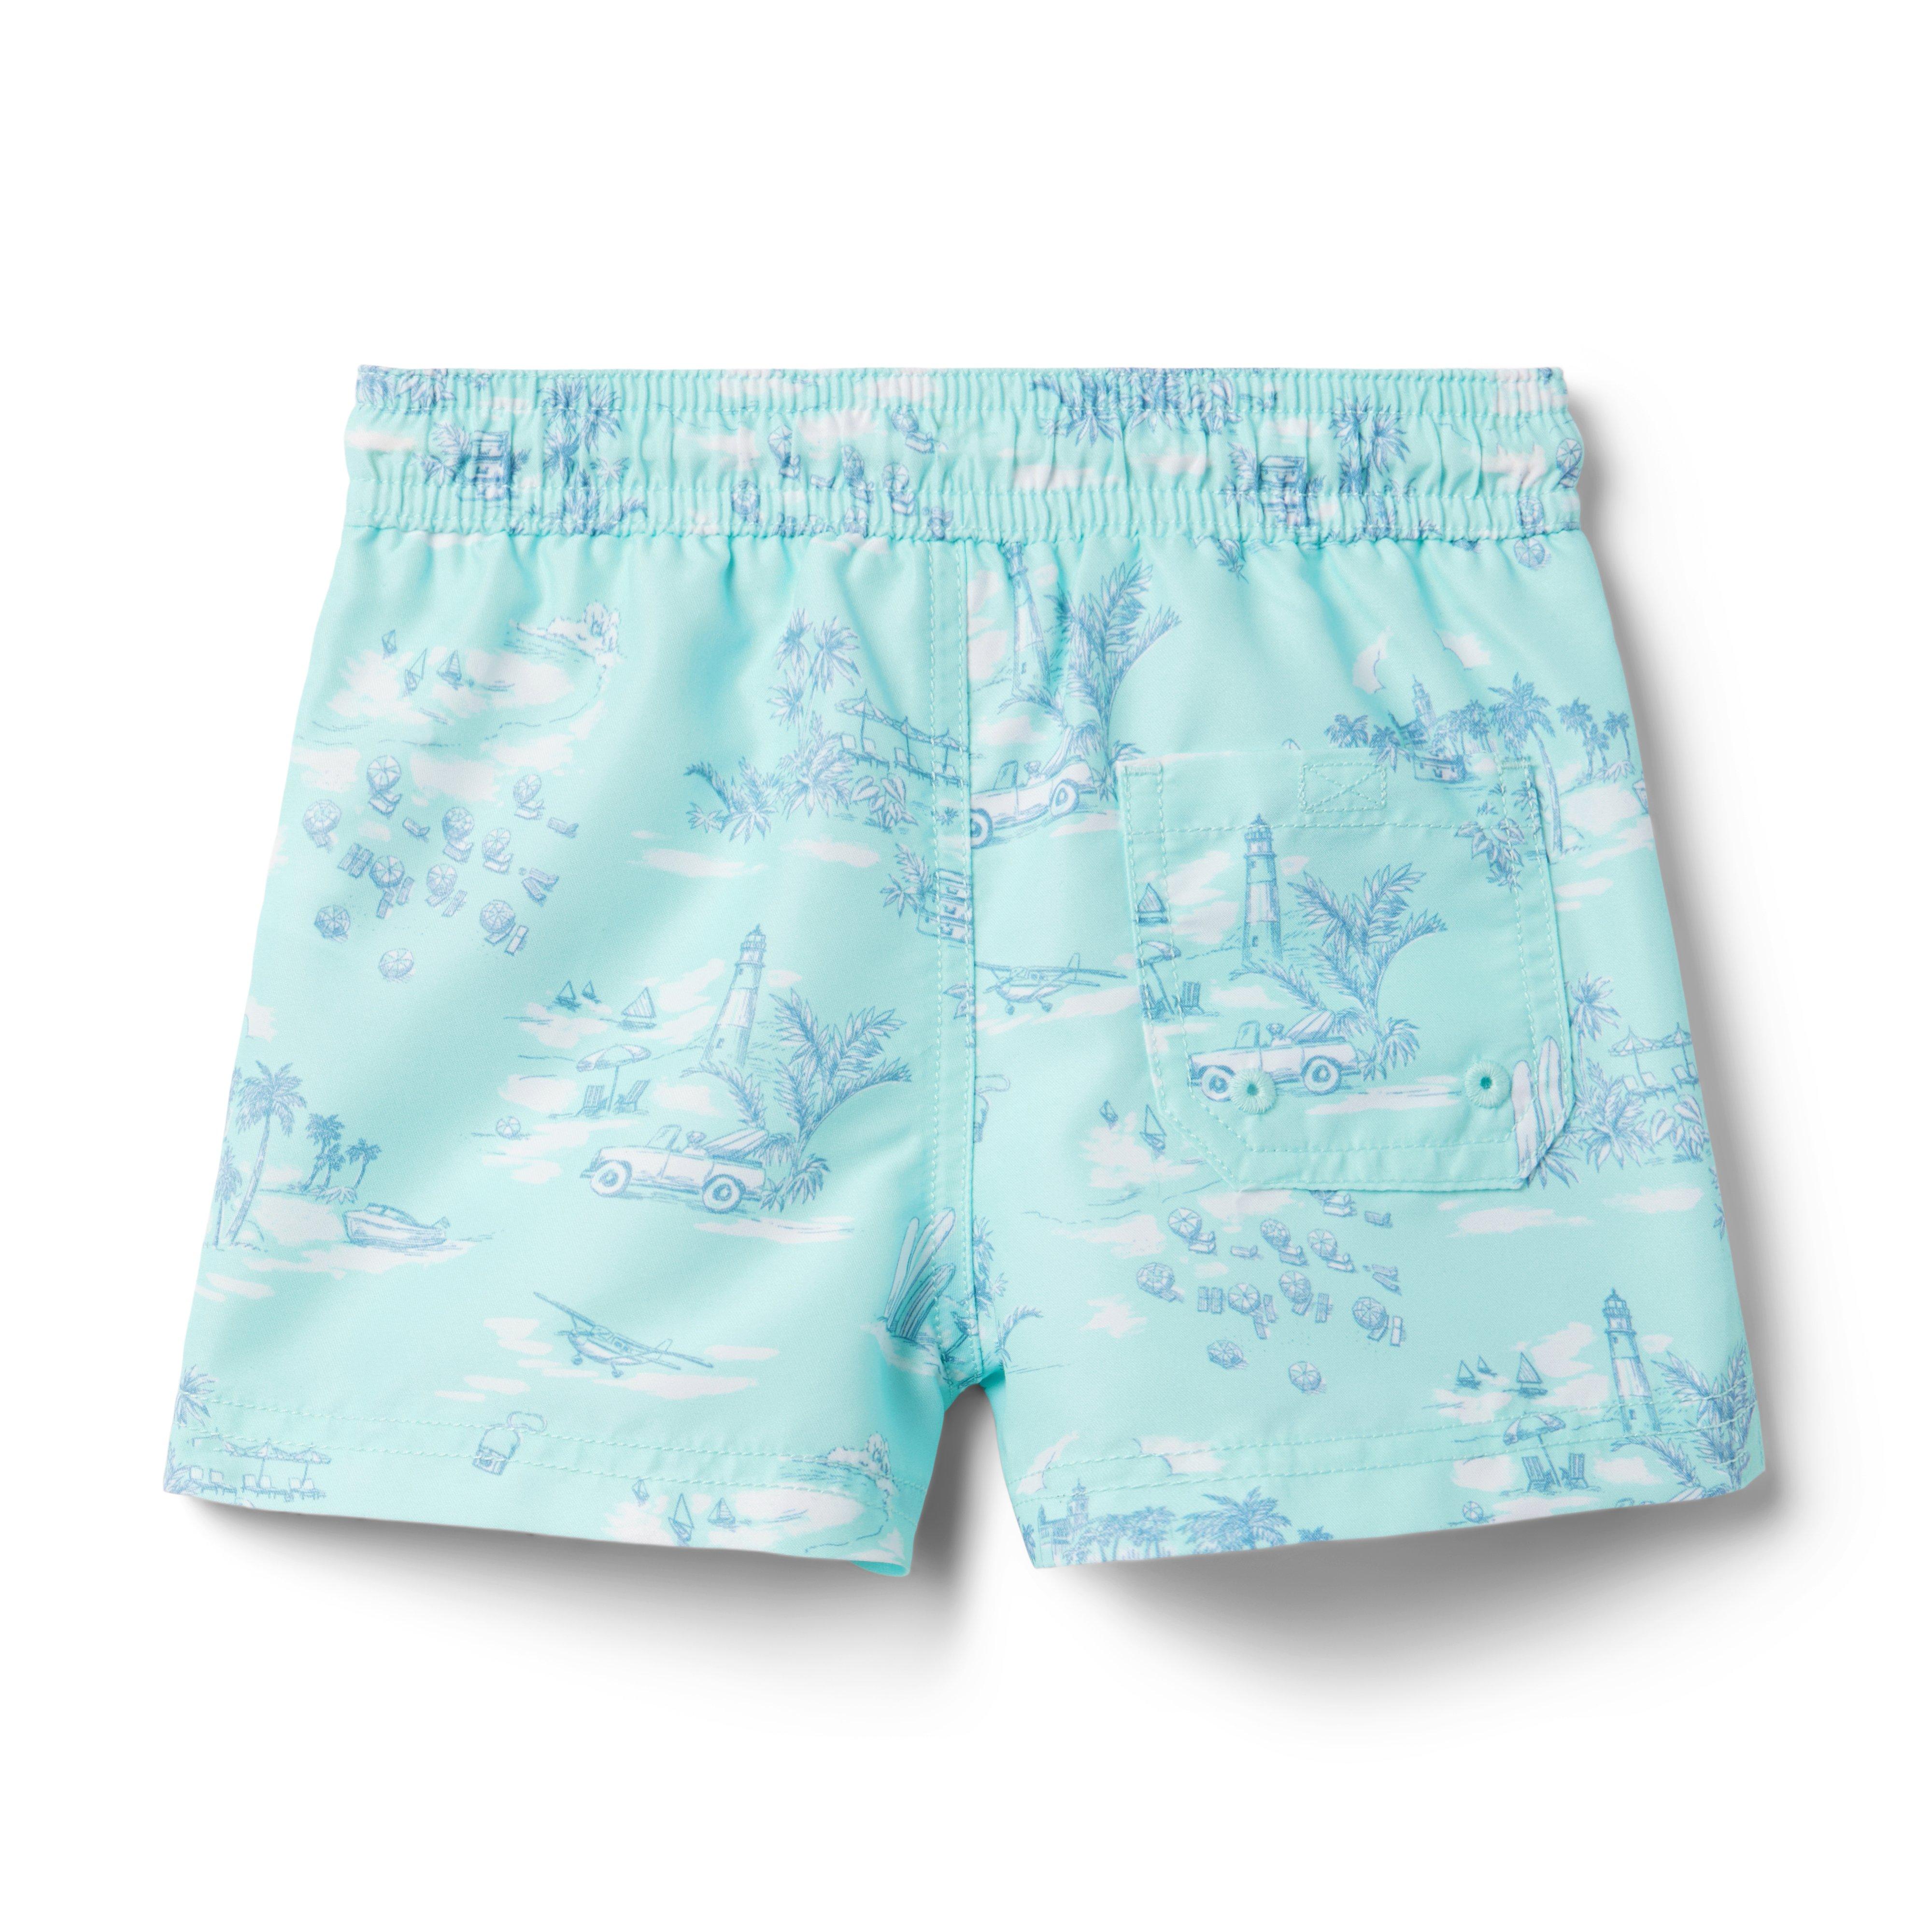 Gray Malin Recycled Travel Toile Swim Trunk image number 2